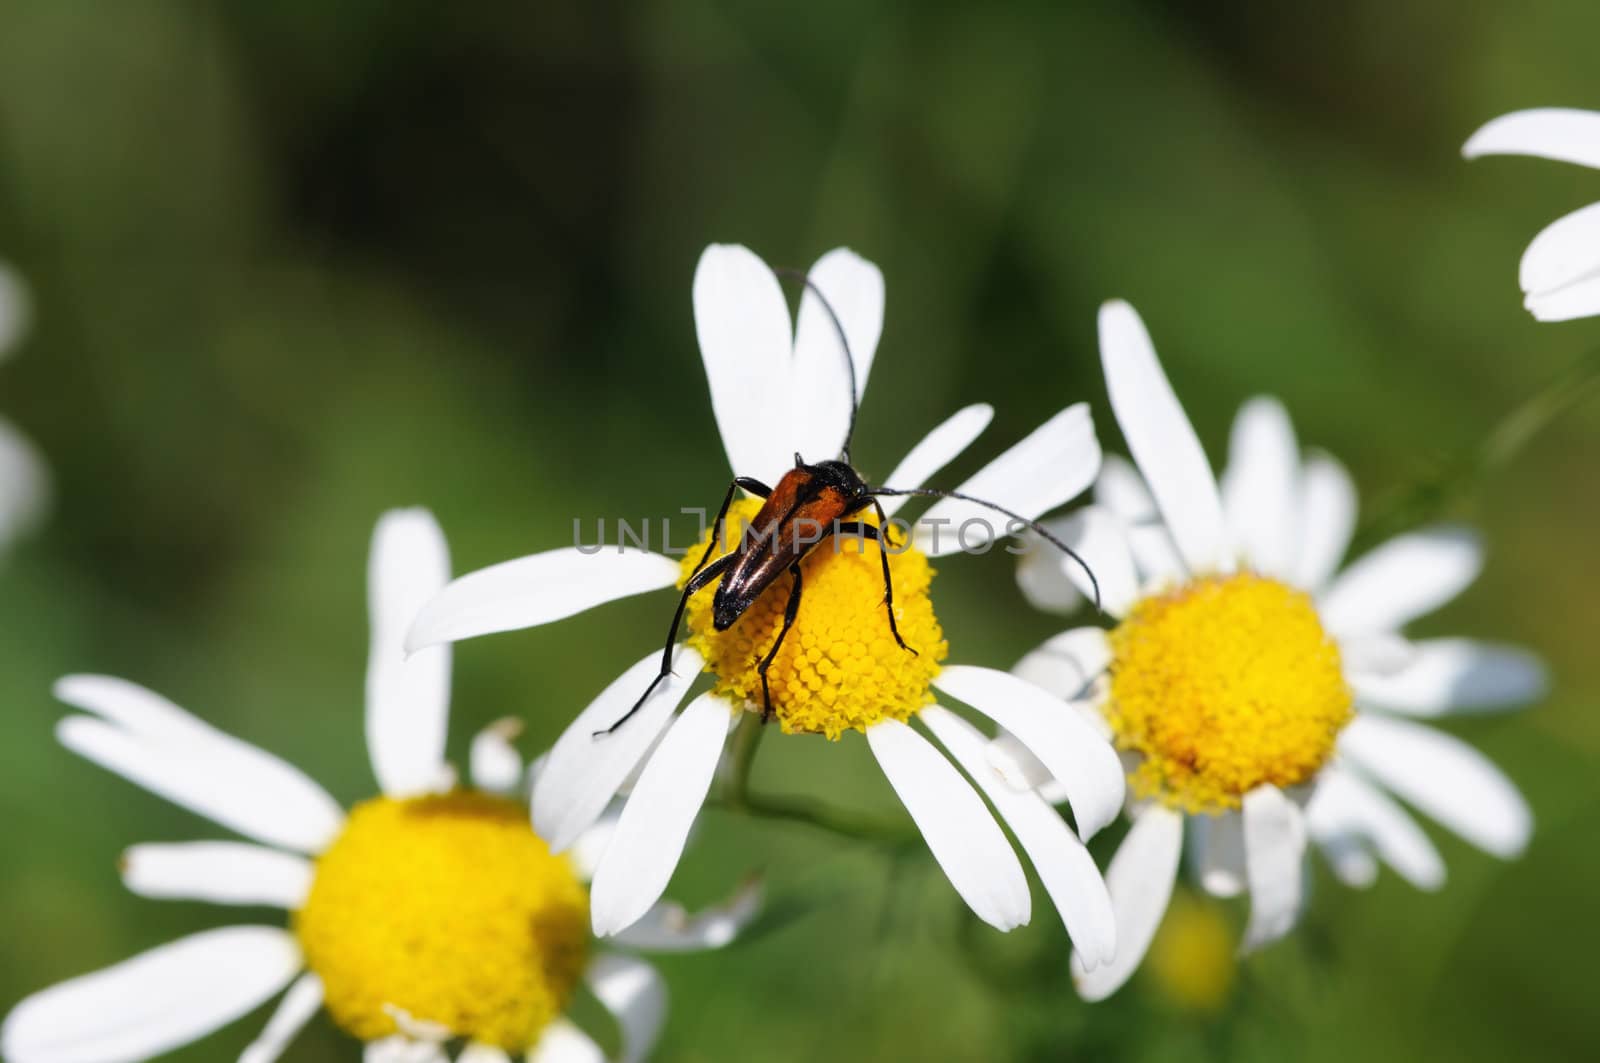 The brown beetle picking pollen on a camomile